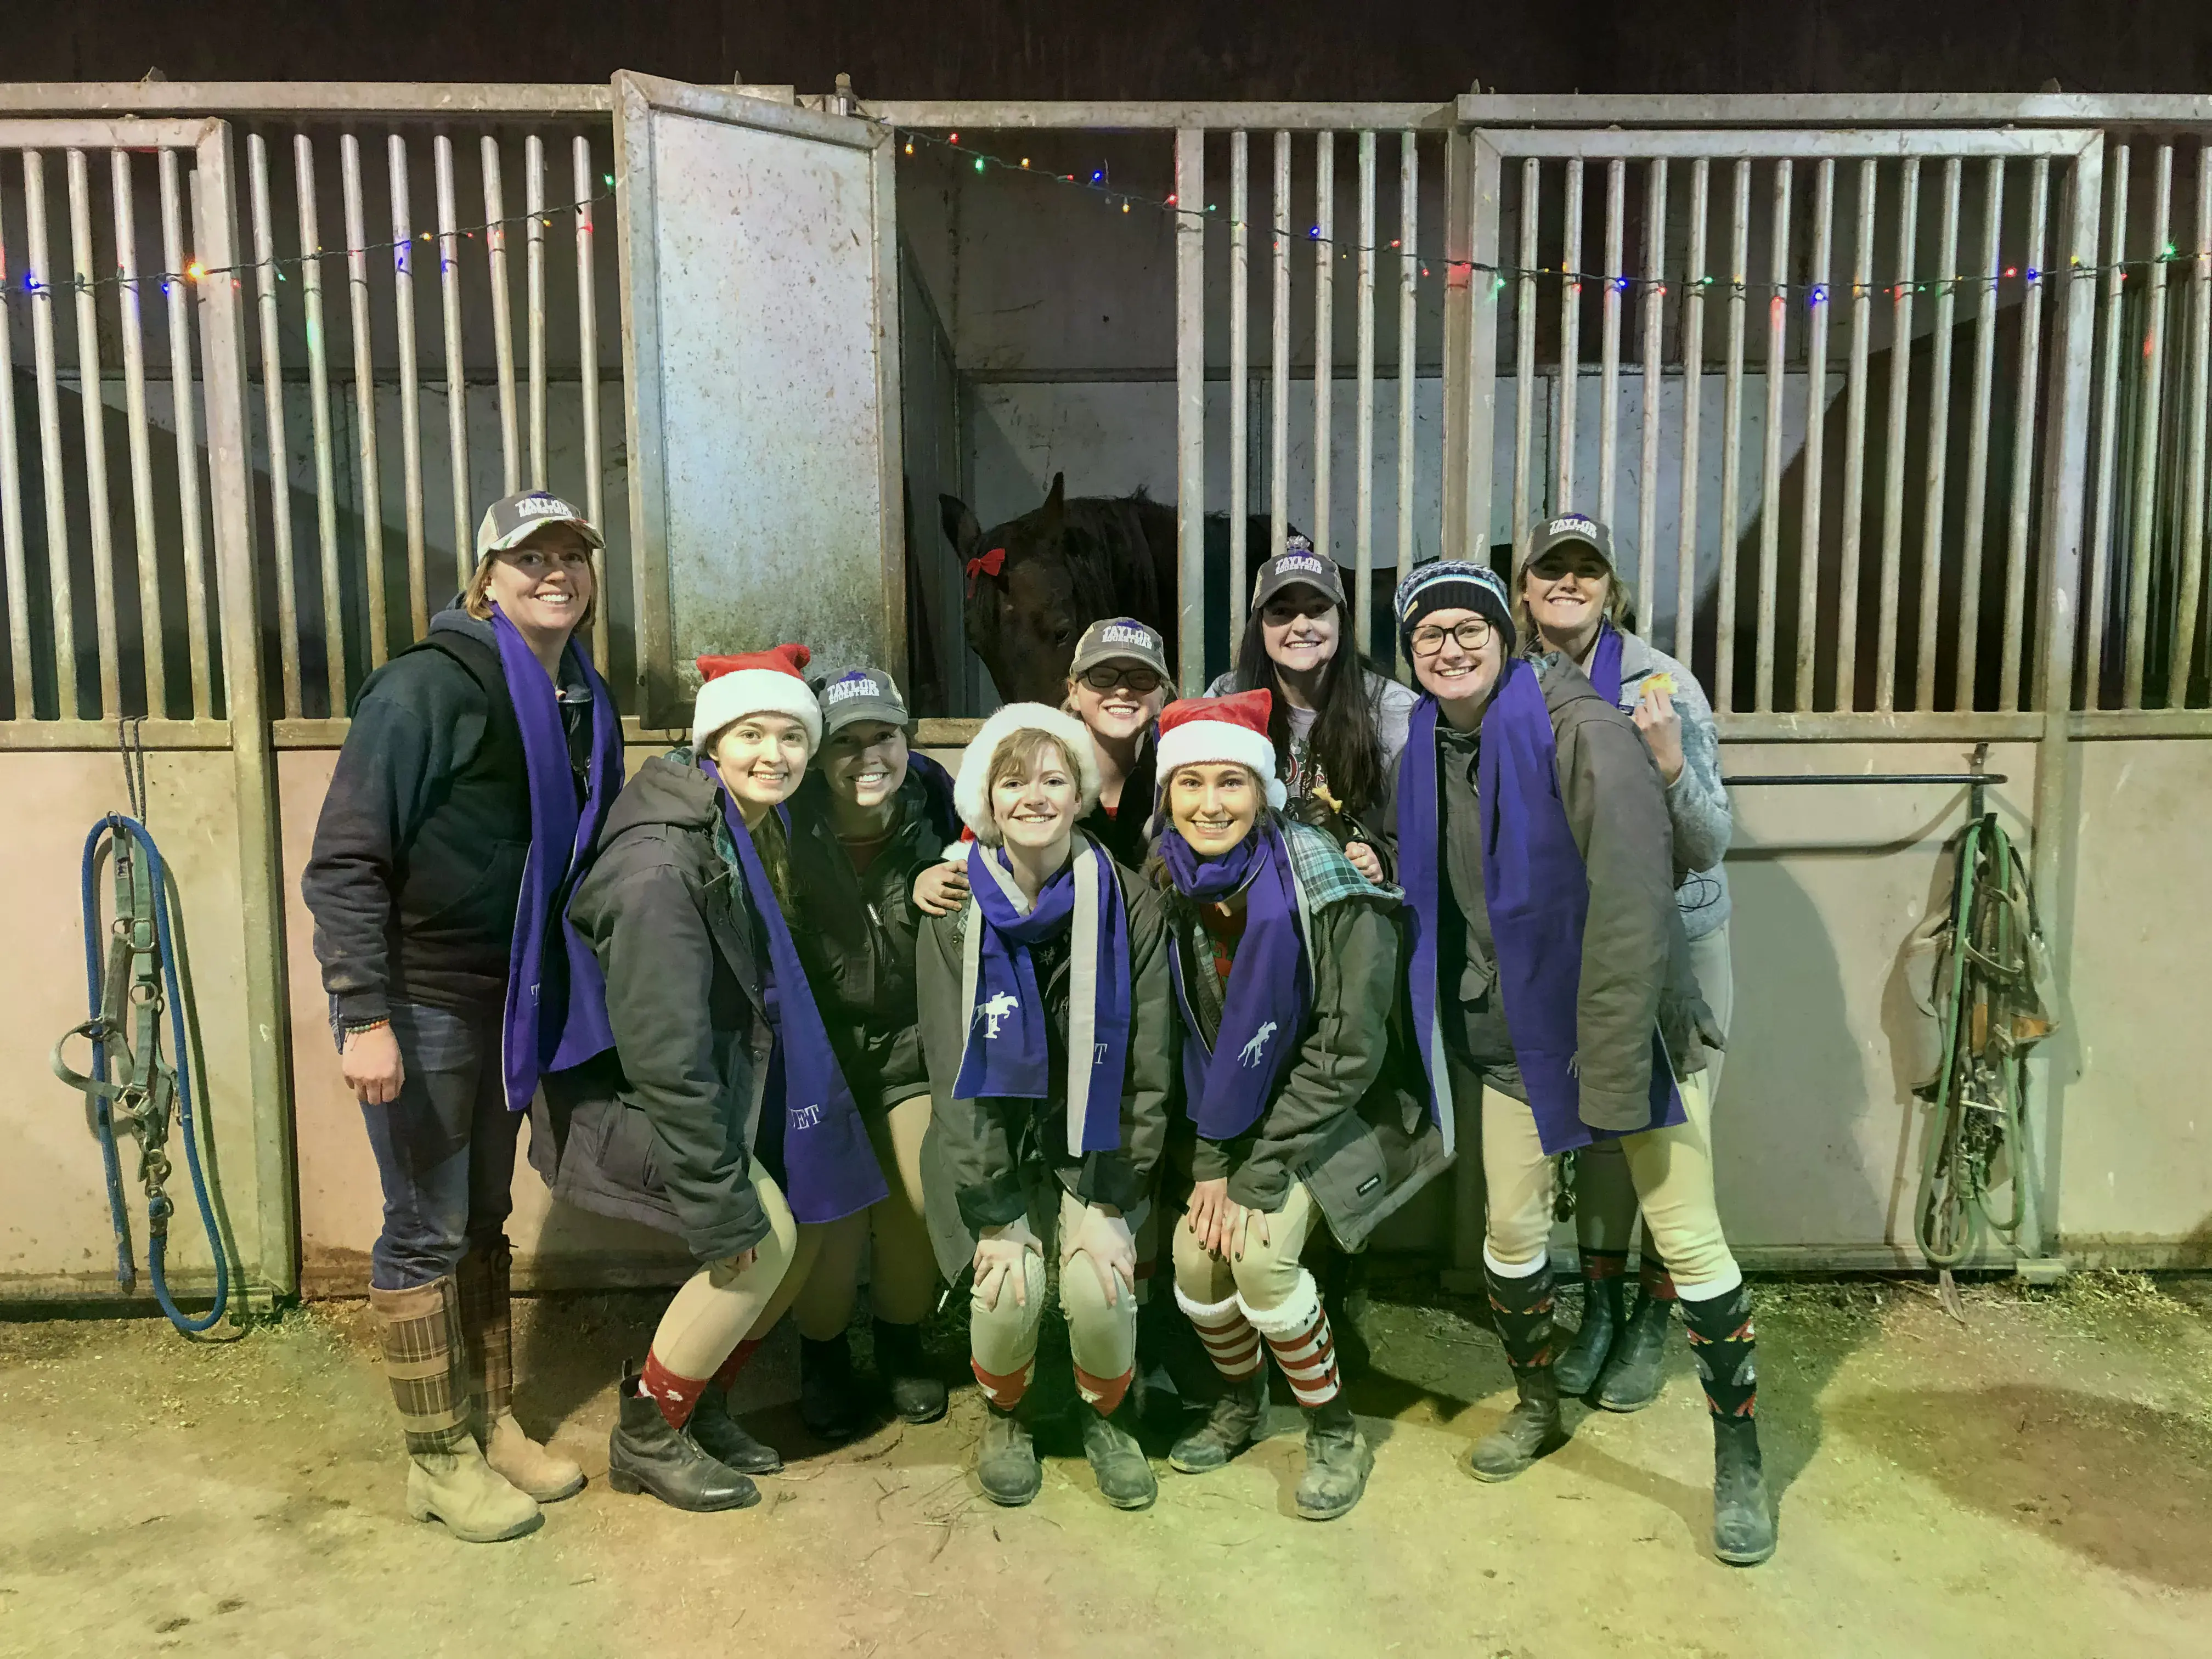 The Equestrian Team in hats and scarves in front of a stable